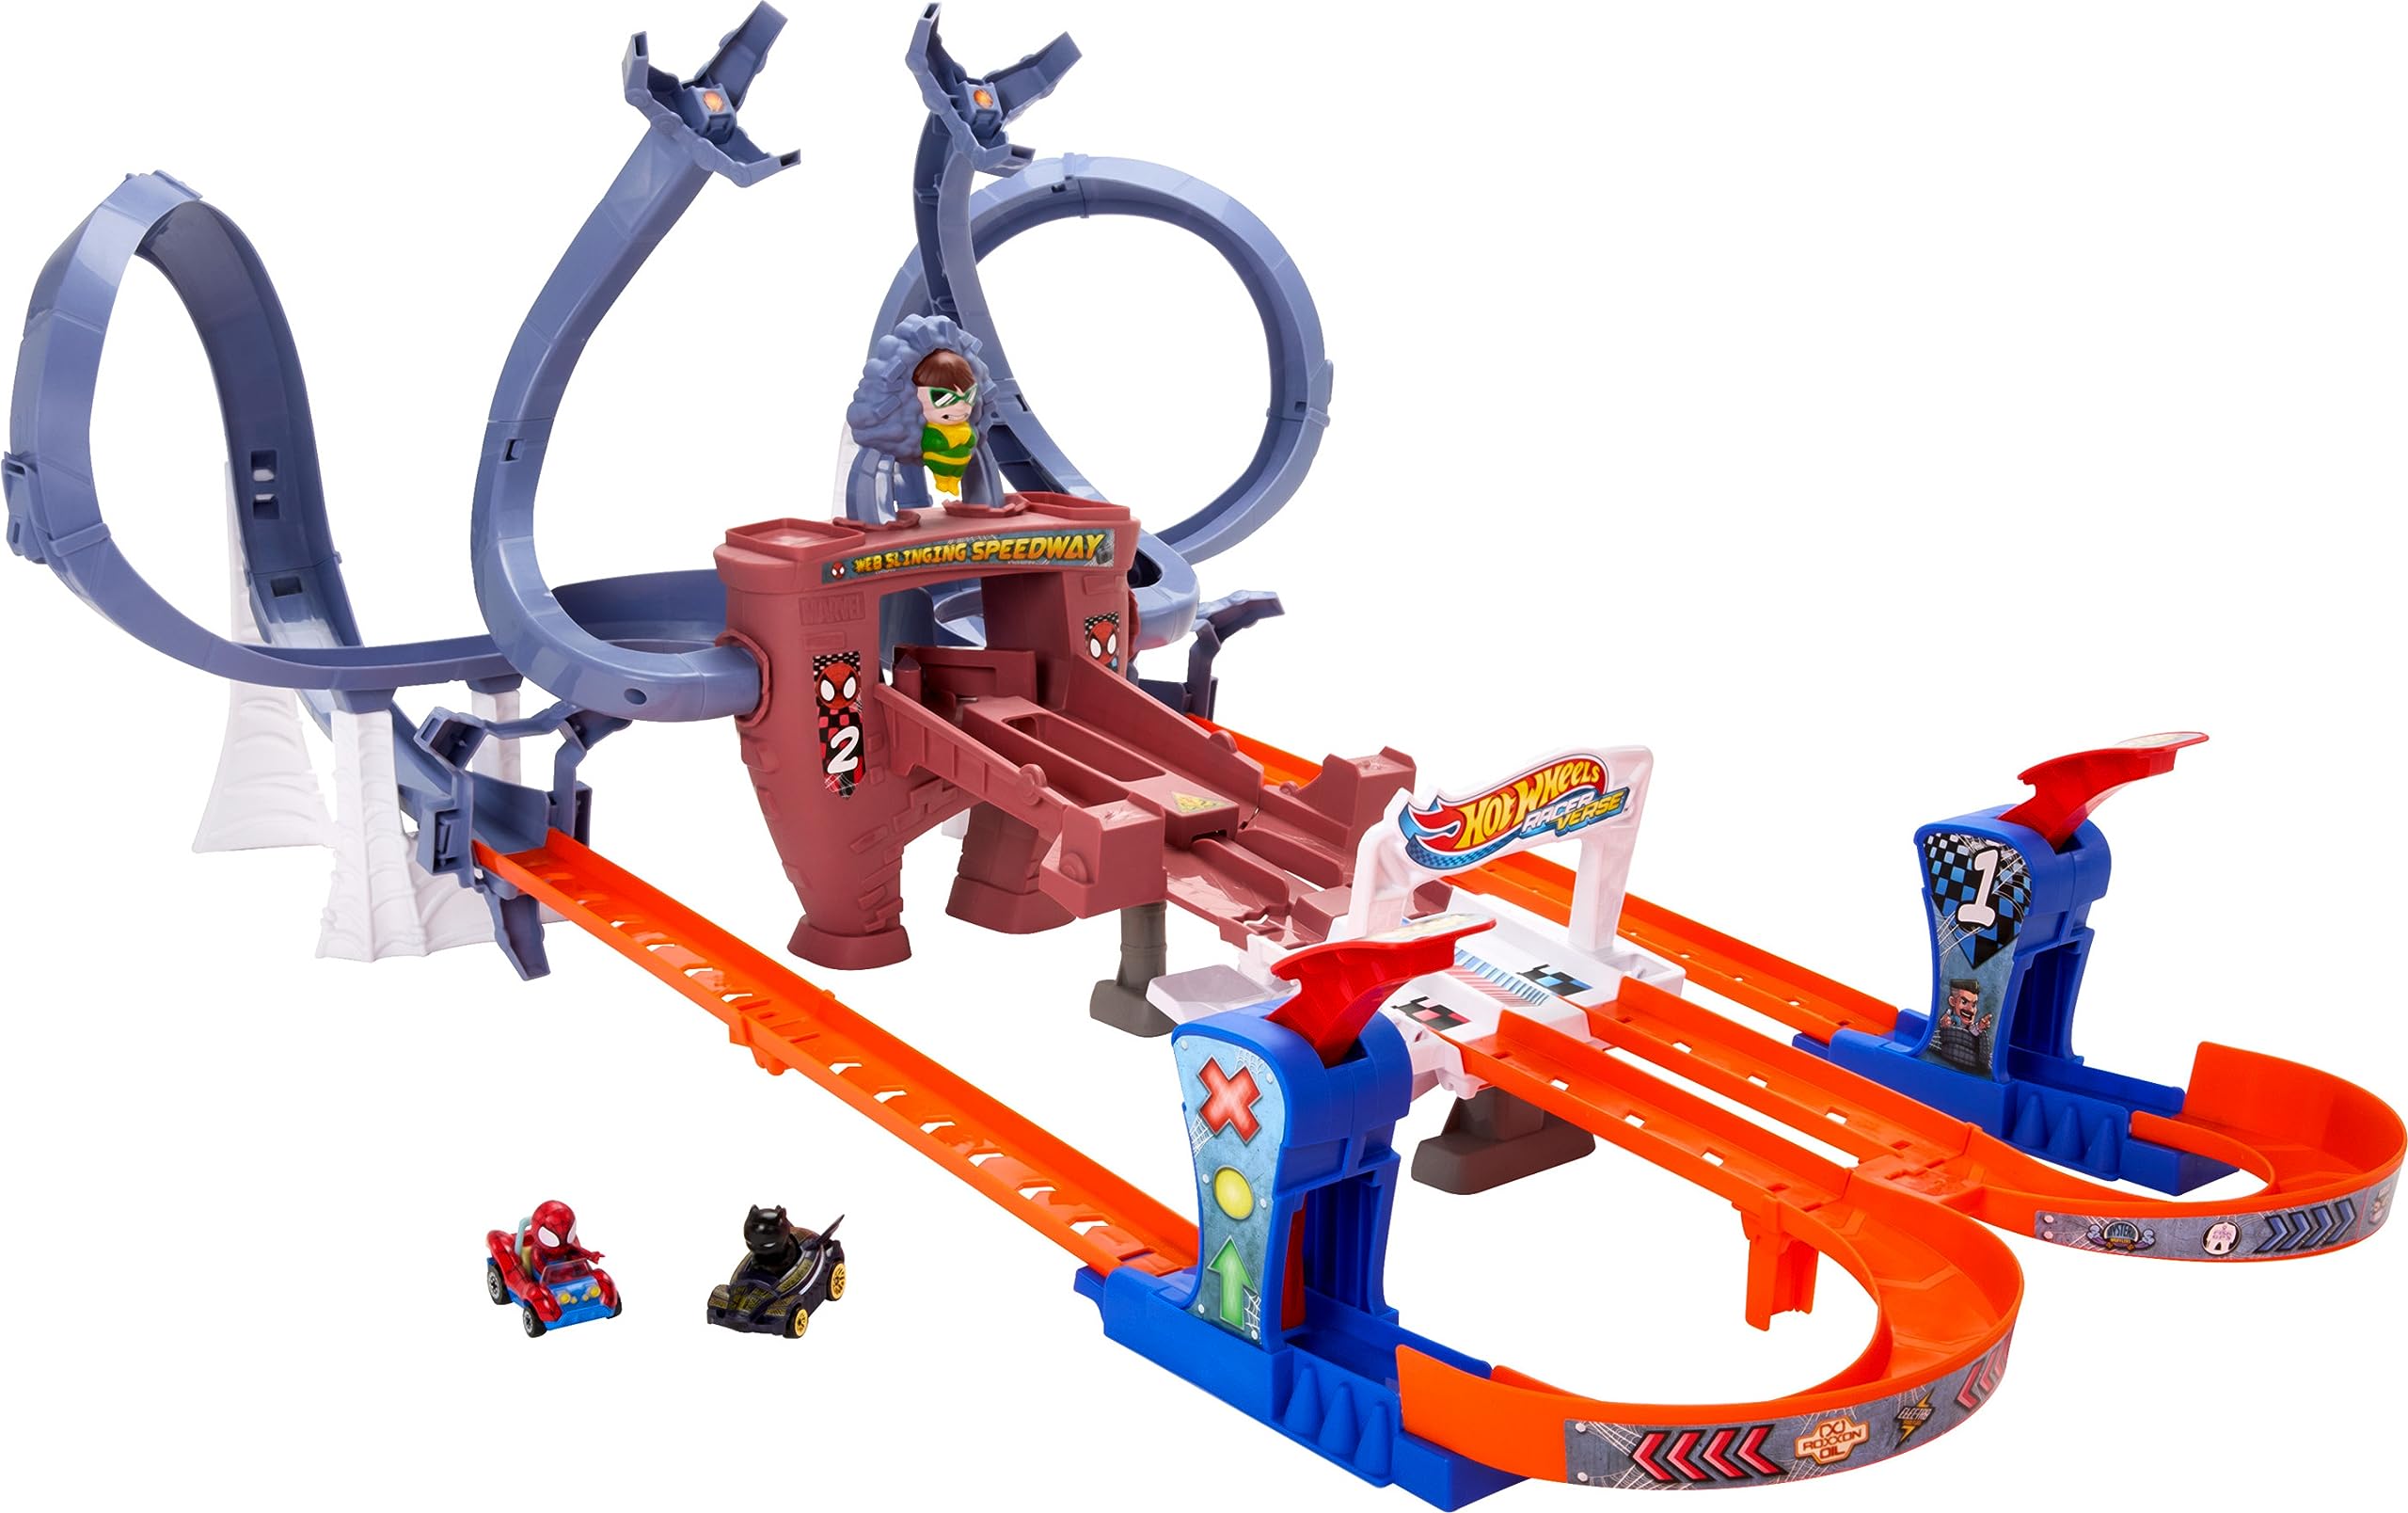 Hot Wheels RacerVerse Spider-Man’s Web-Slinging Speedway Track Set with Racers Spider-Man & Black Panther, Multi-Lap Race to Escape Doc Ock